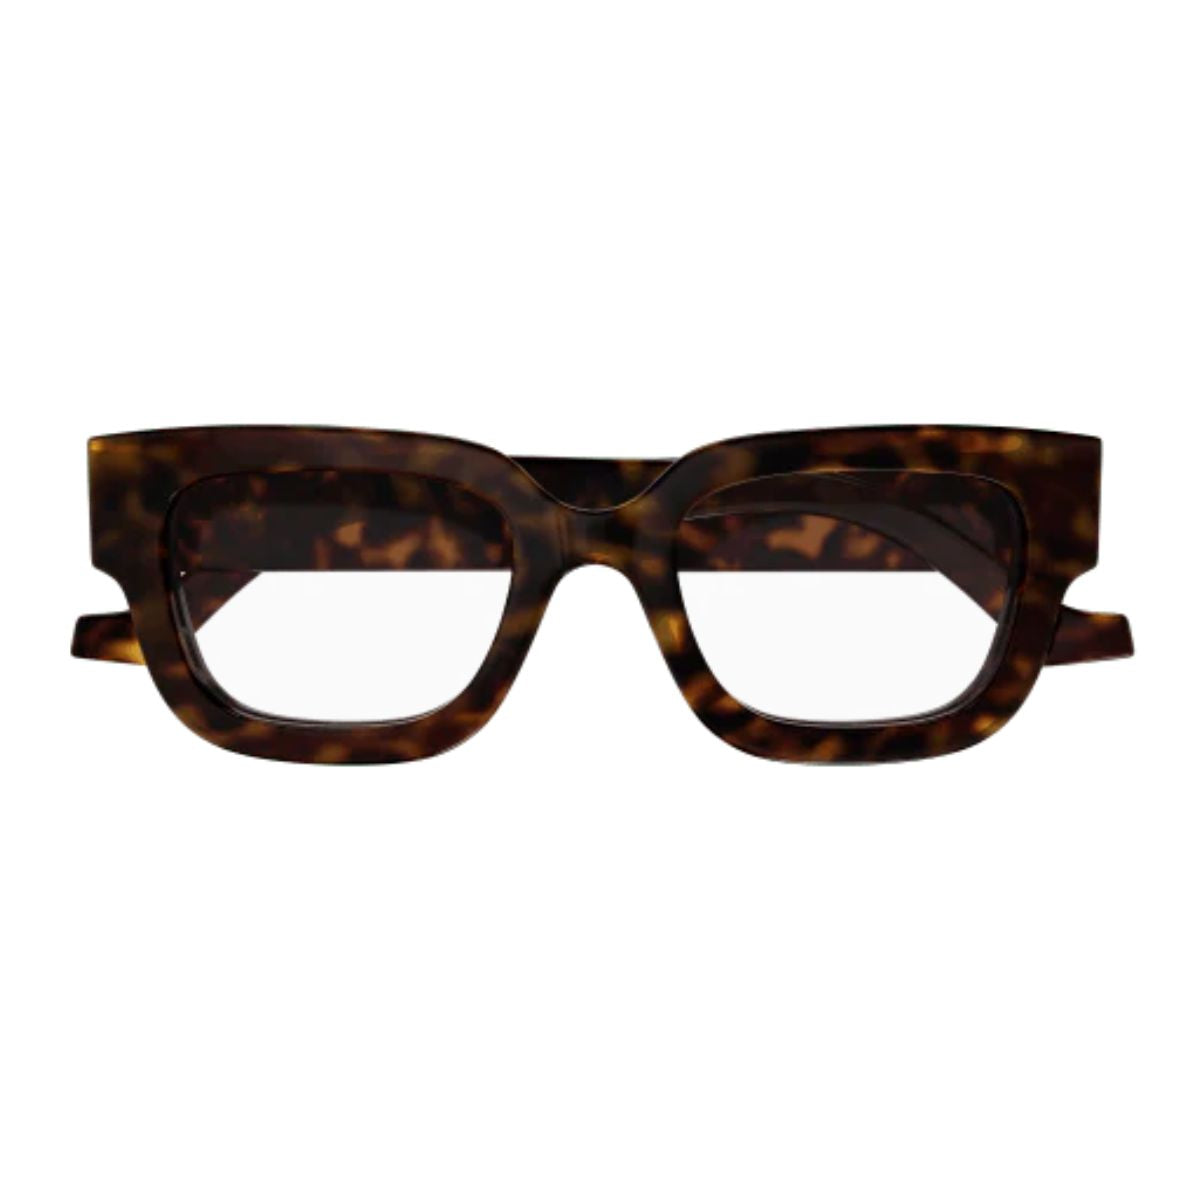 "Trendy Gucci 1548O 002 Frames for Women - Optorium's Collection"